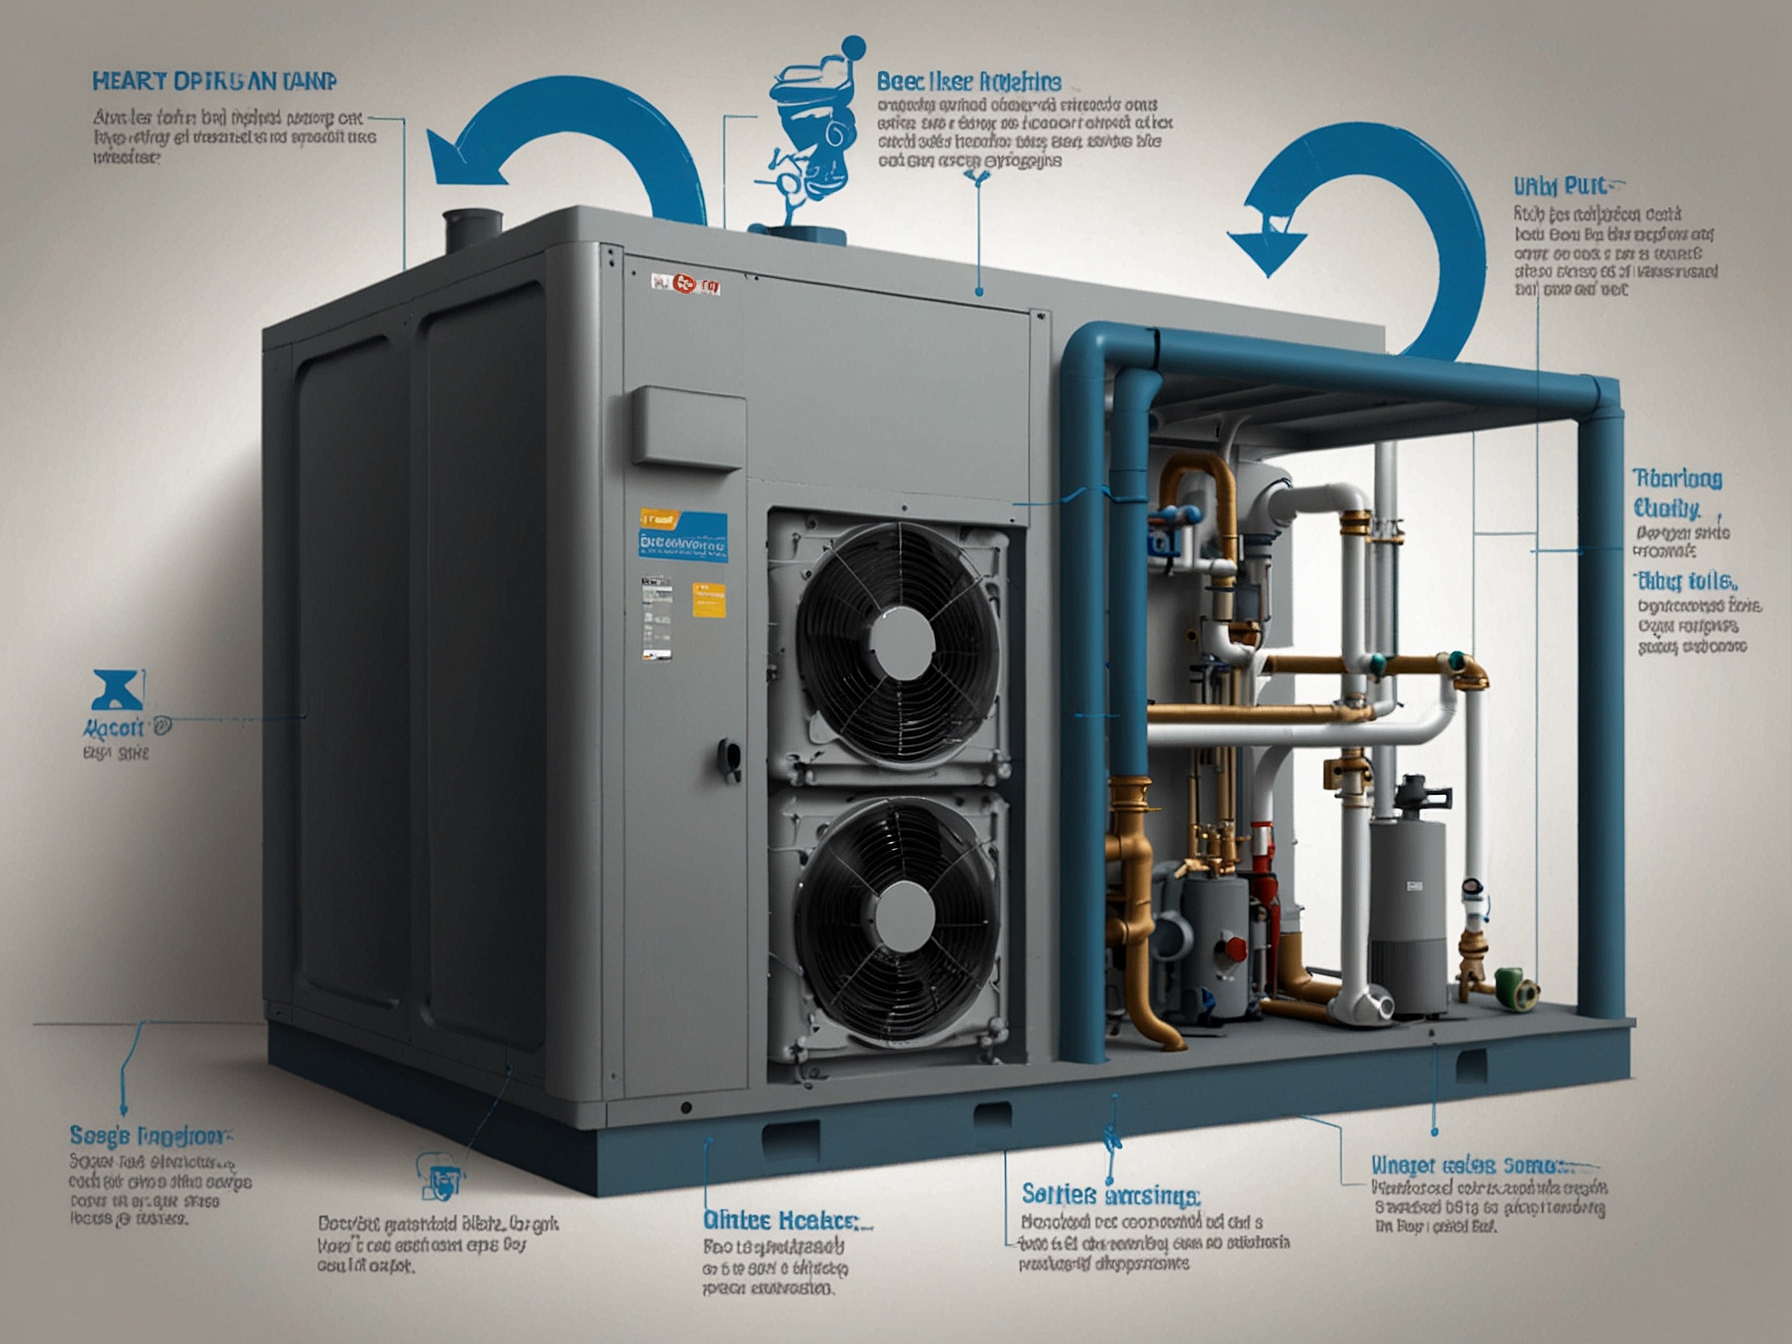 An infographic highlighting the benefits of heat pumps over traditional gas boilers, focusing on environmental impact and long-term cost savings for UK households.